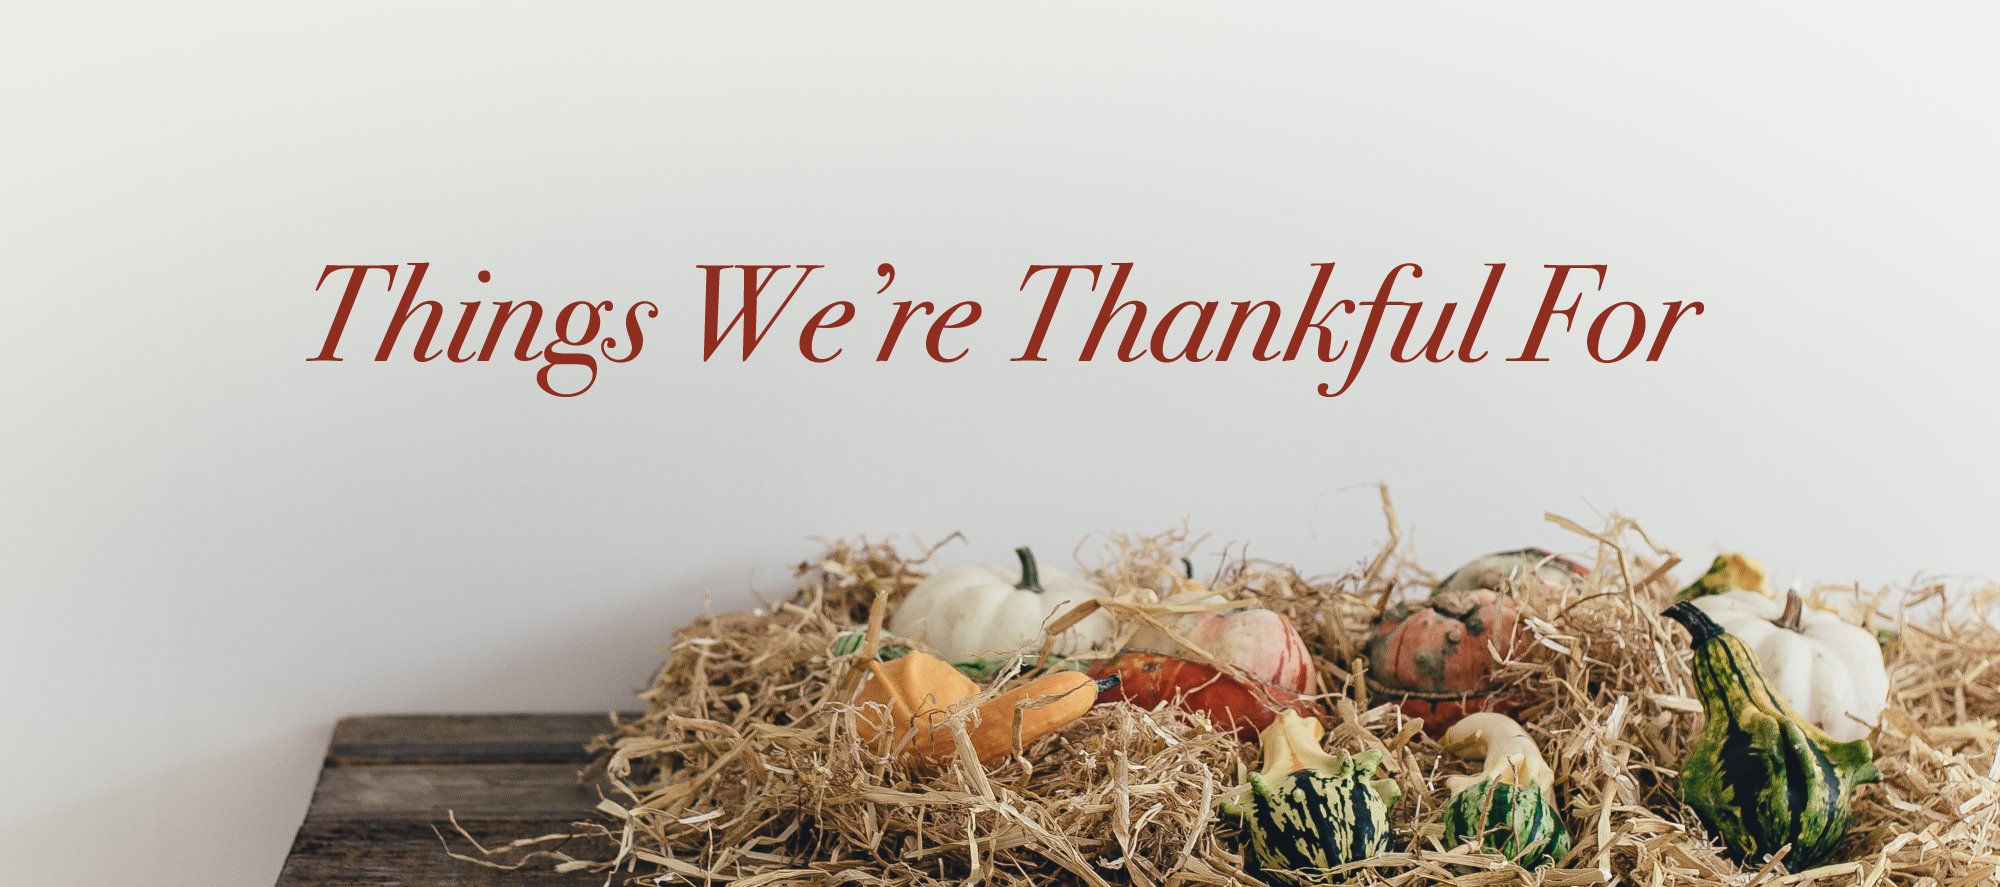 Things We're Thankful For